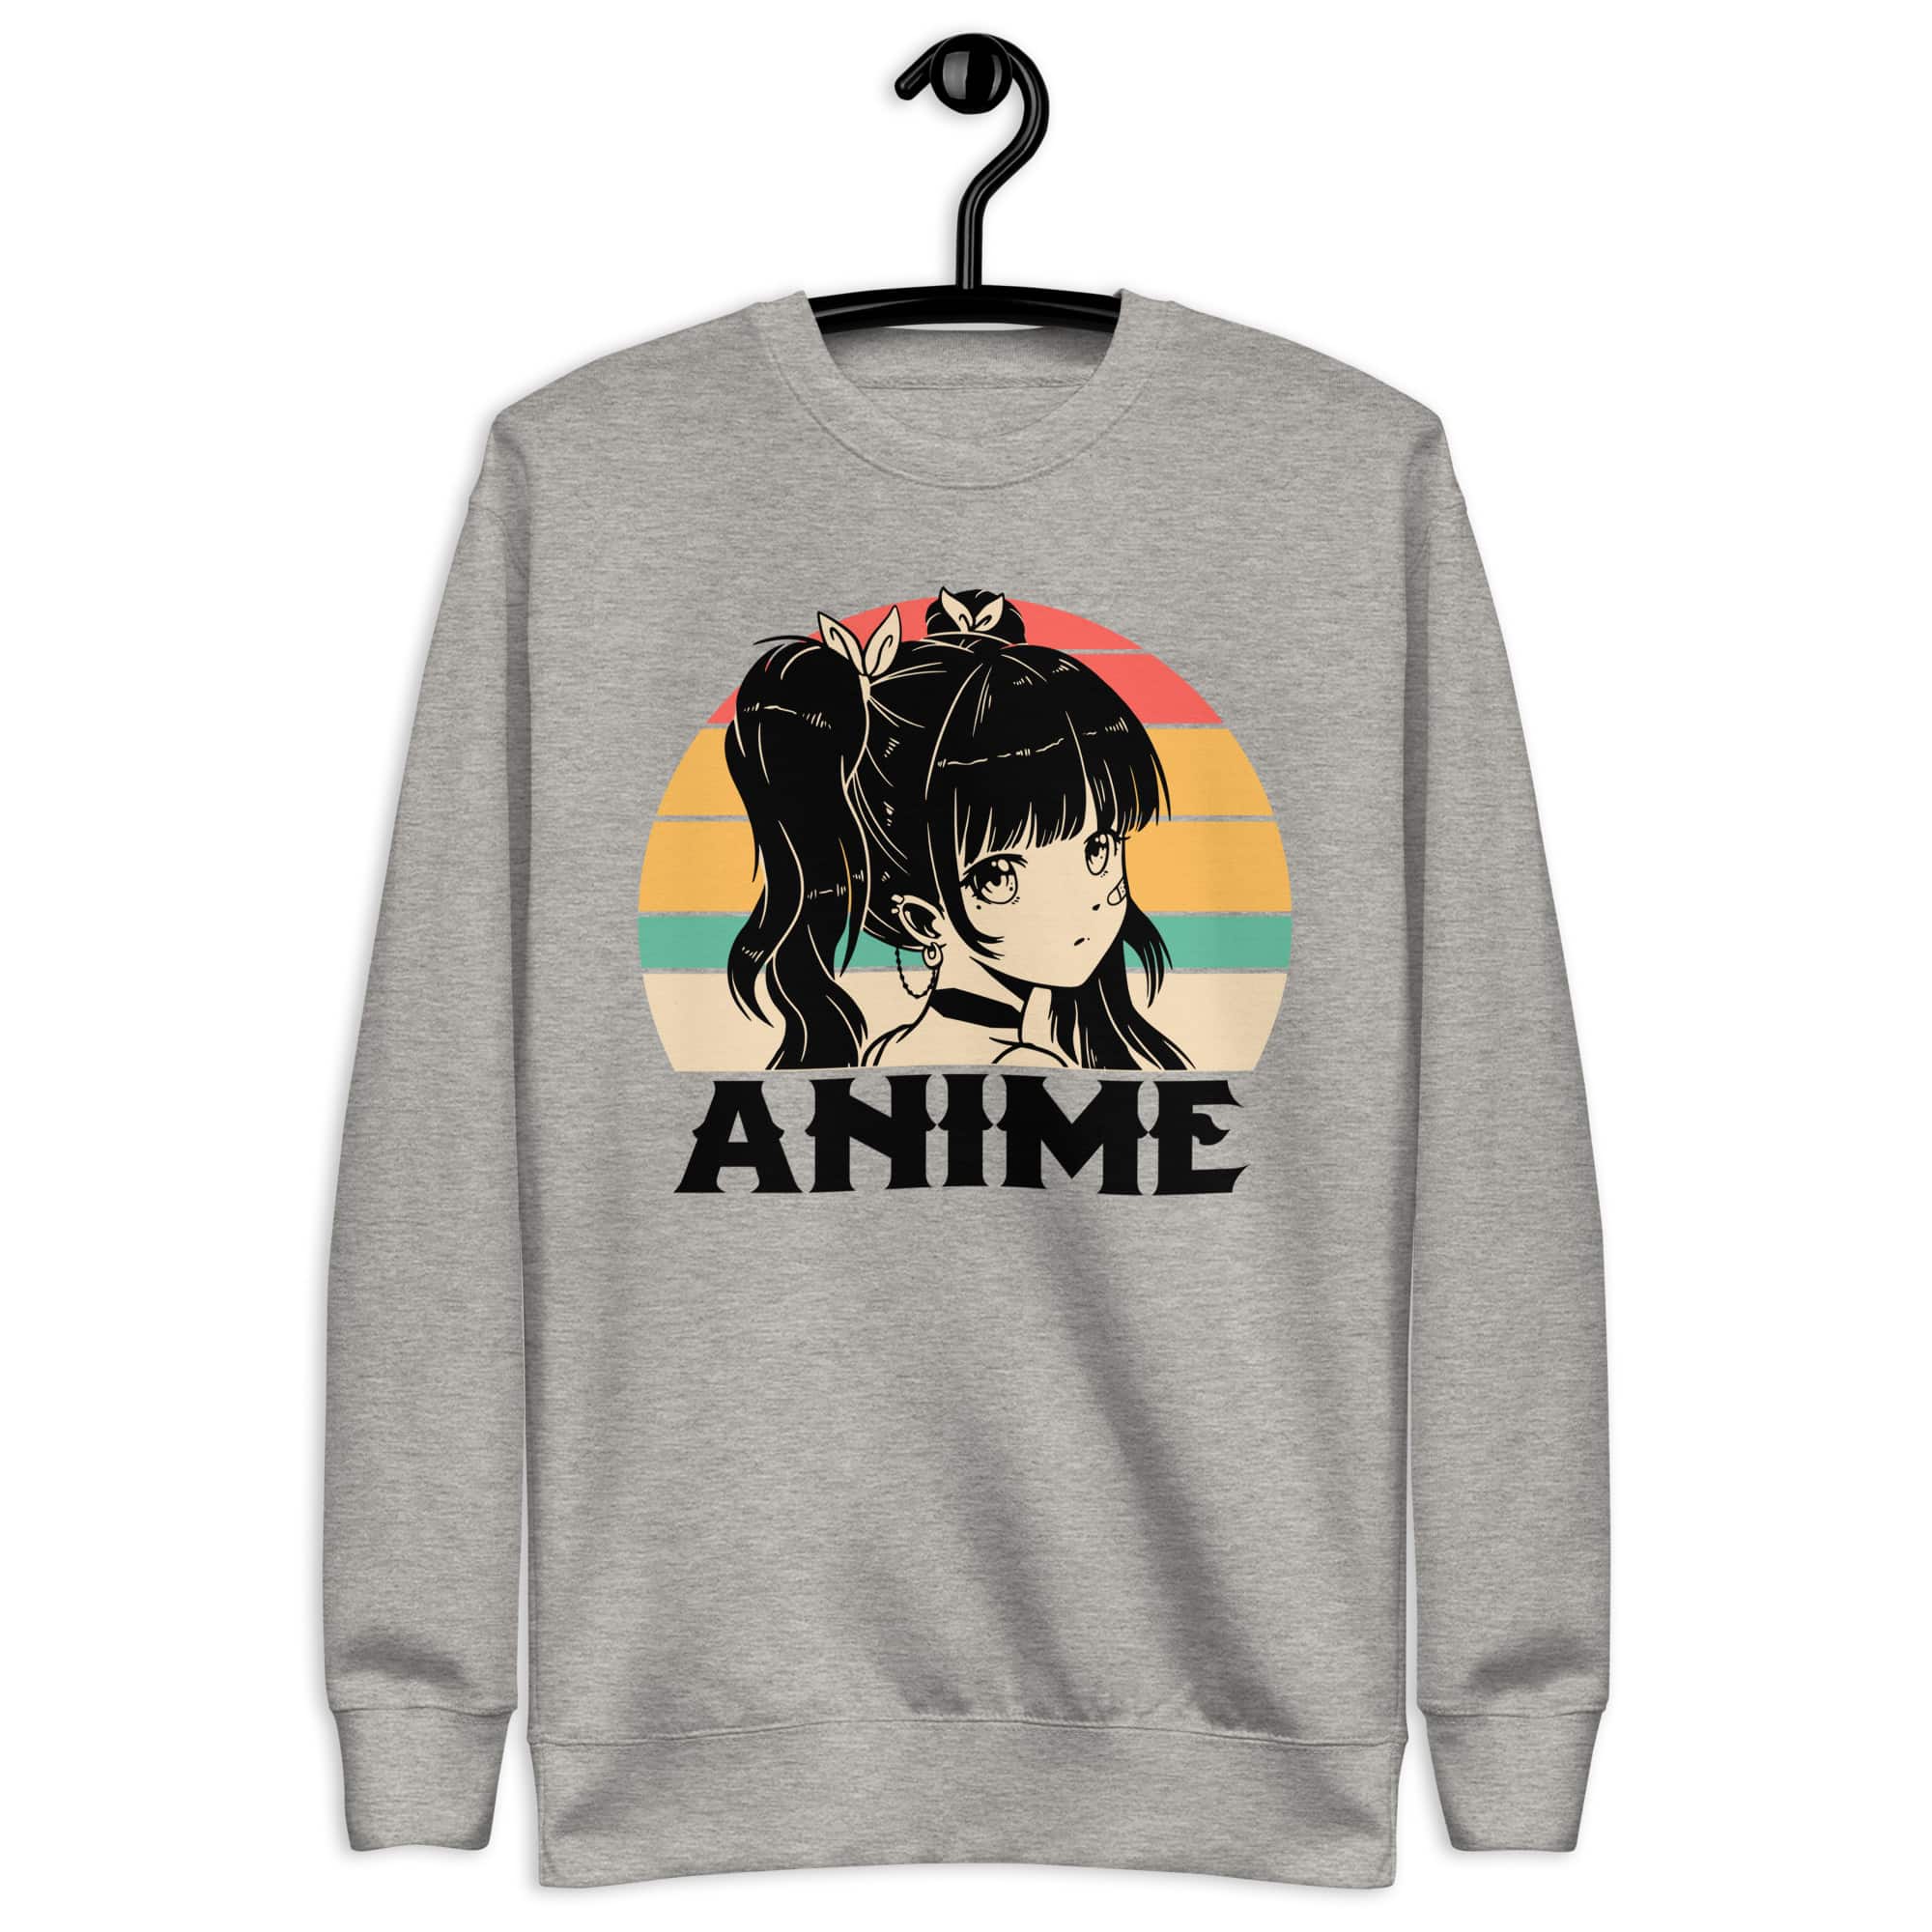 Anime Girl Sunset Sweatshirt Video game store Gaming merchandise Gaming accessories shop Online gaming store Video game shop near me Gaming console store PC gaming store Gaming gear shop Retro gaming shop Board game shop Anime merchandise Anime store online Japanese anime shop Anime figurines Manga shop Anime DVDs Anime accessories Anime apparel Anime collectibles Anime gifts